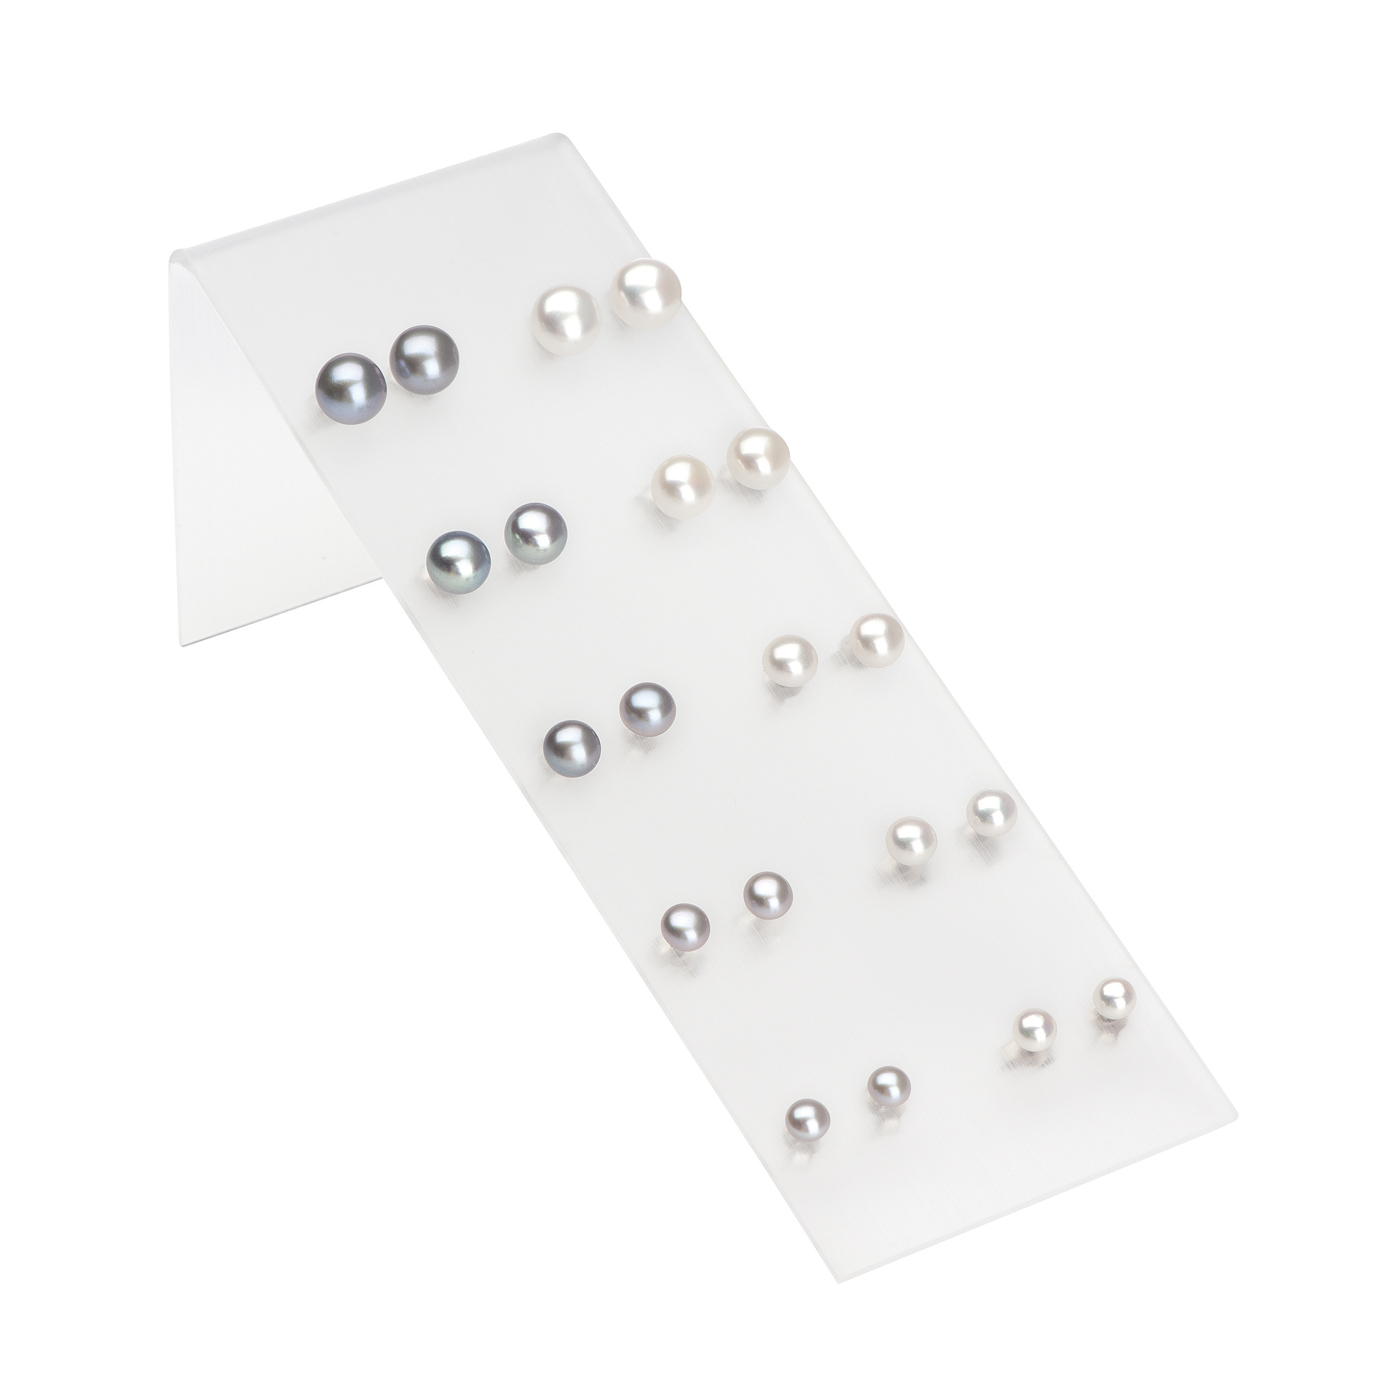 Pearl Ear Stud with Display, White/Silver - 1 assortment